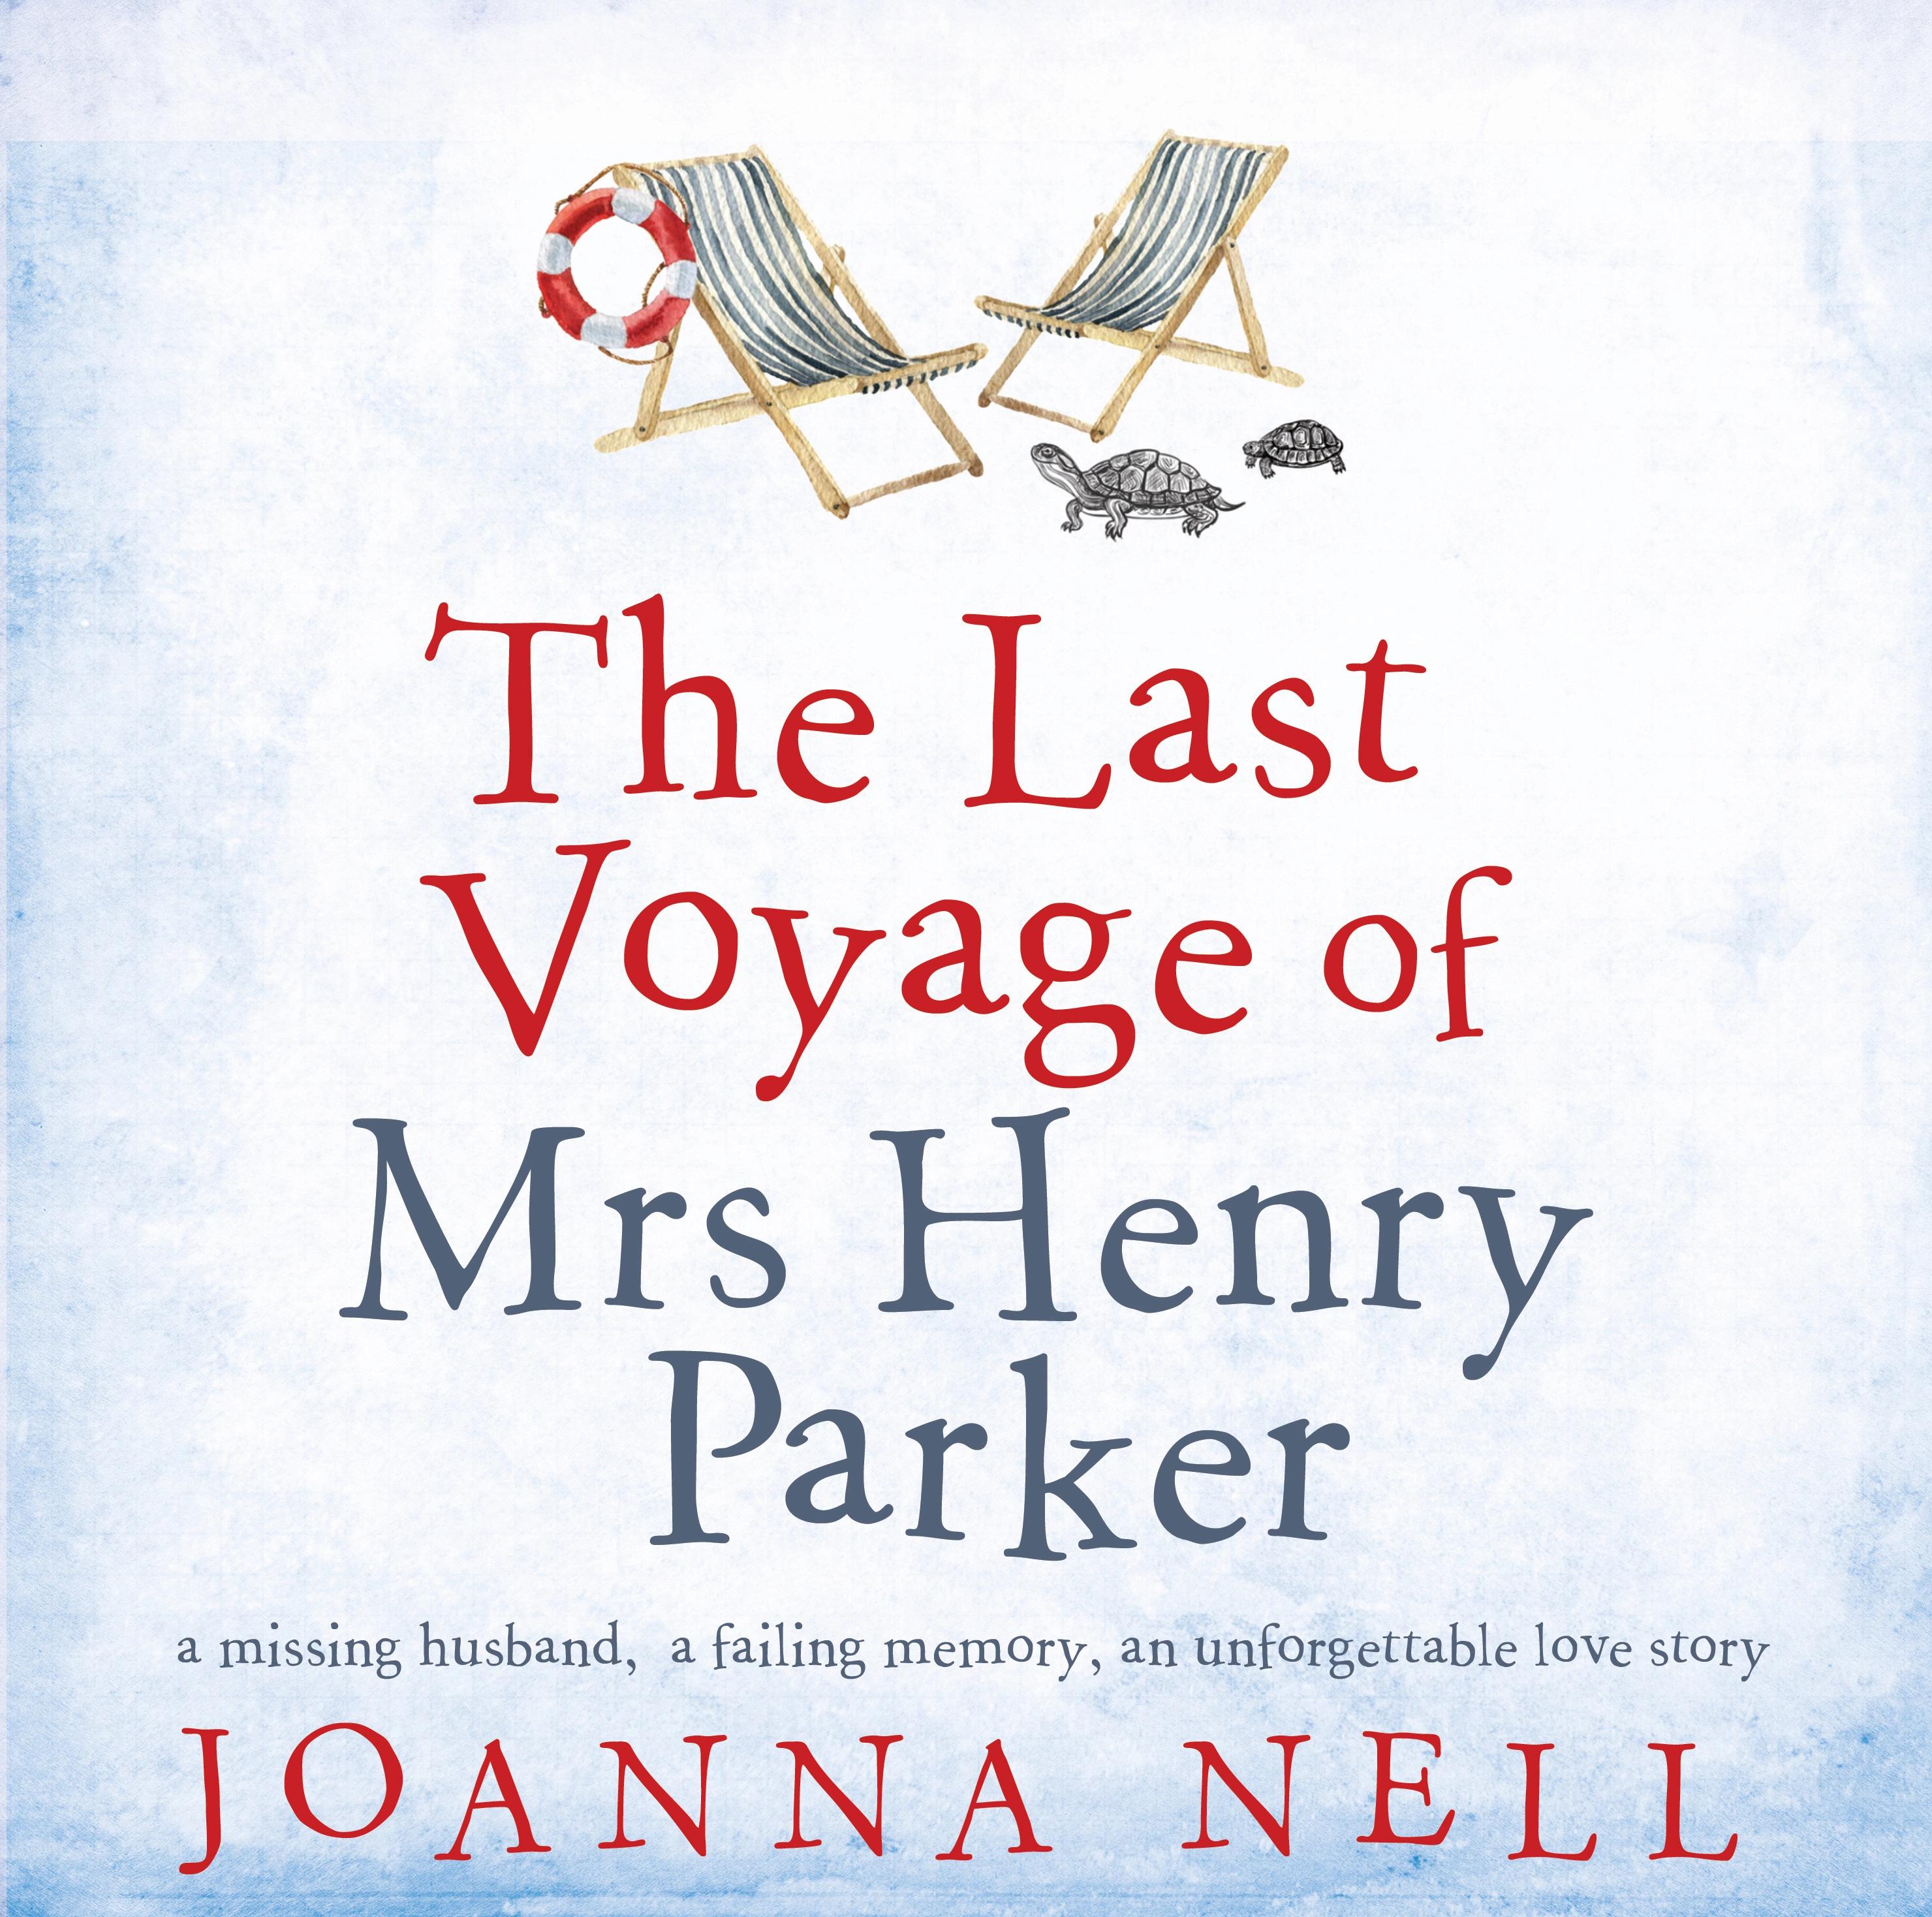 Book Review: The Last Voyage of Mrs. Henry Parker